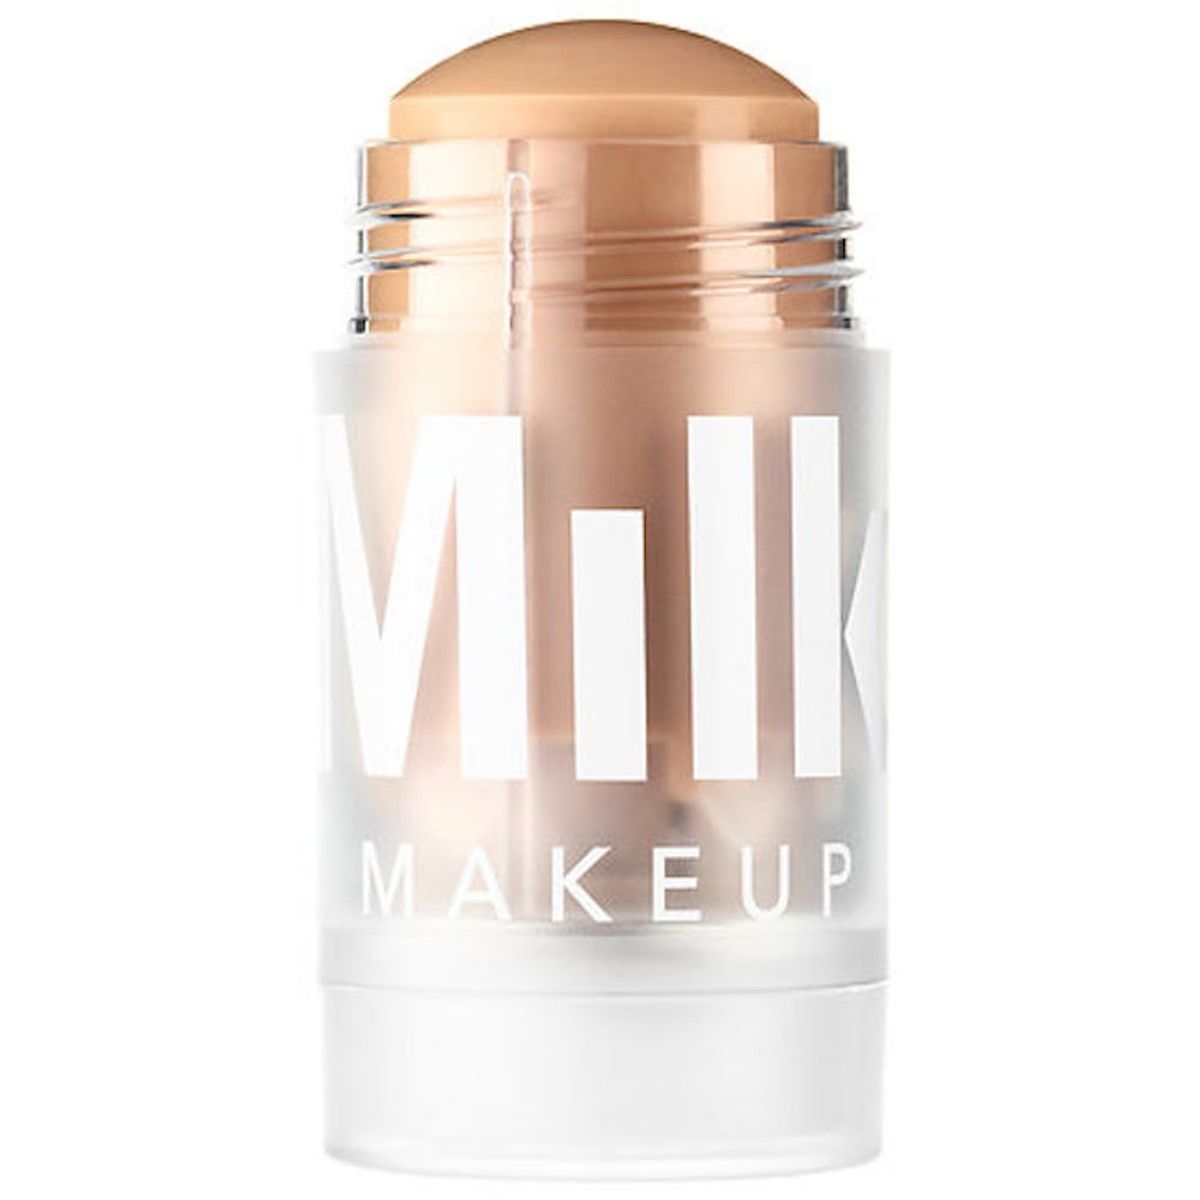 Milk Makeup x Very Good Light Is the Most Gender-Fluid Beauty Campaign Yet